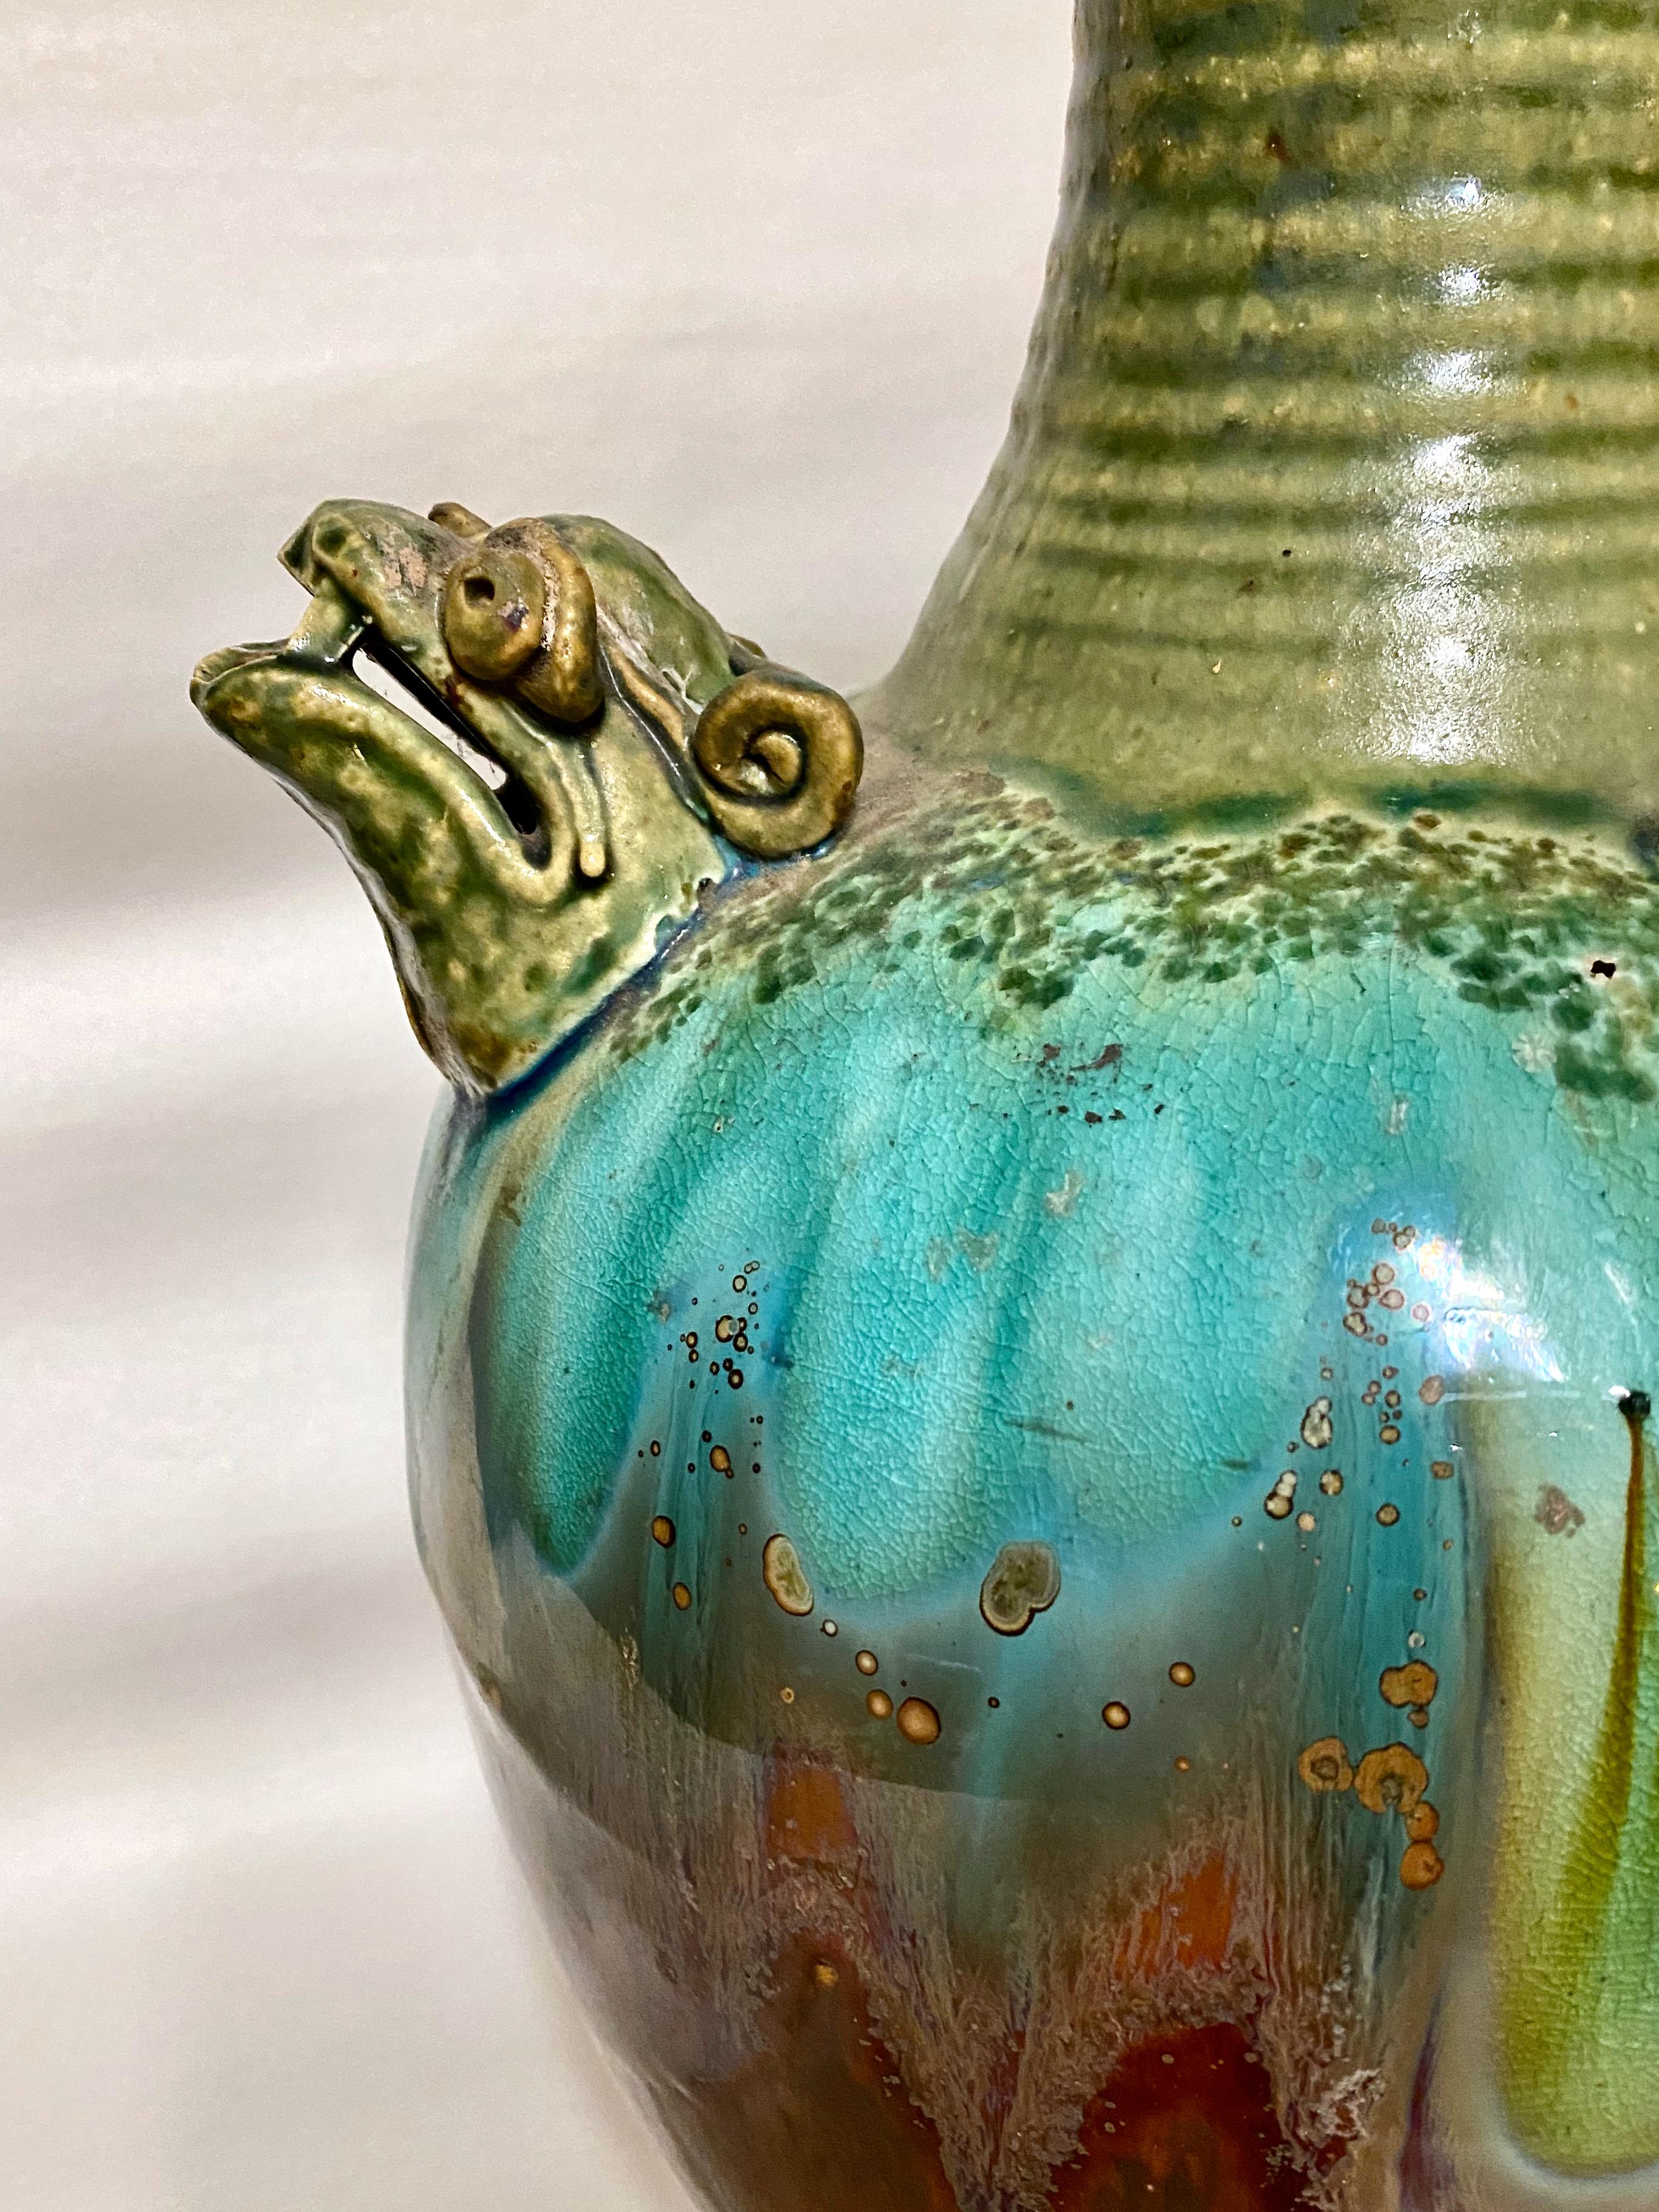 This is a stunning large Chinese glazed terracotta dragon-form ewer. The Double Dragons are cast in fine detail. The ewer derives its inspiration from pottery of the Tang Dynasty; this item most probably dates to the late 19th c. or early 20th